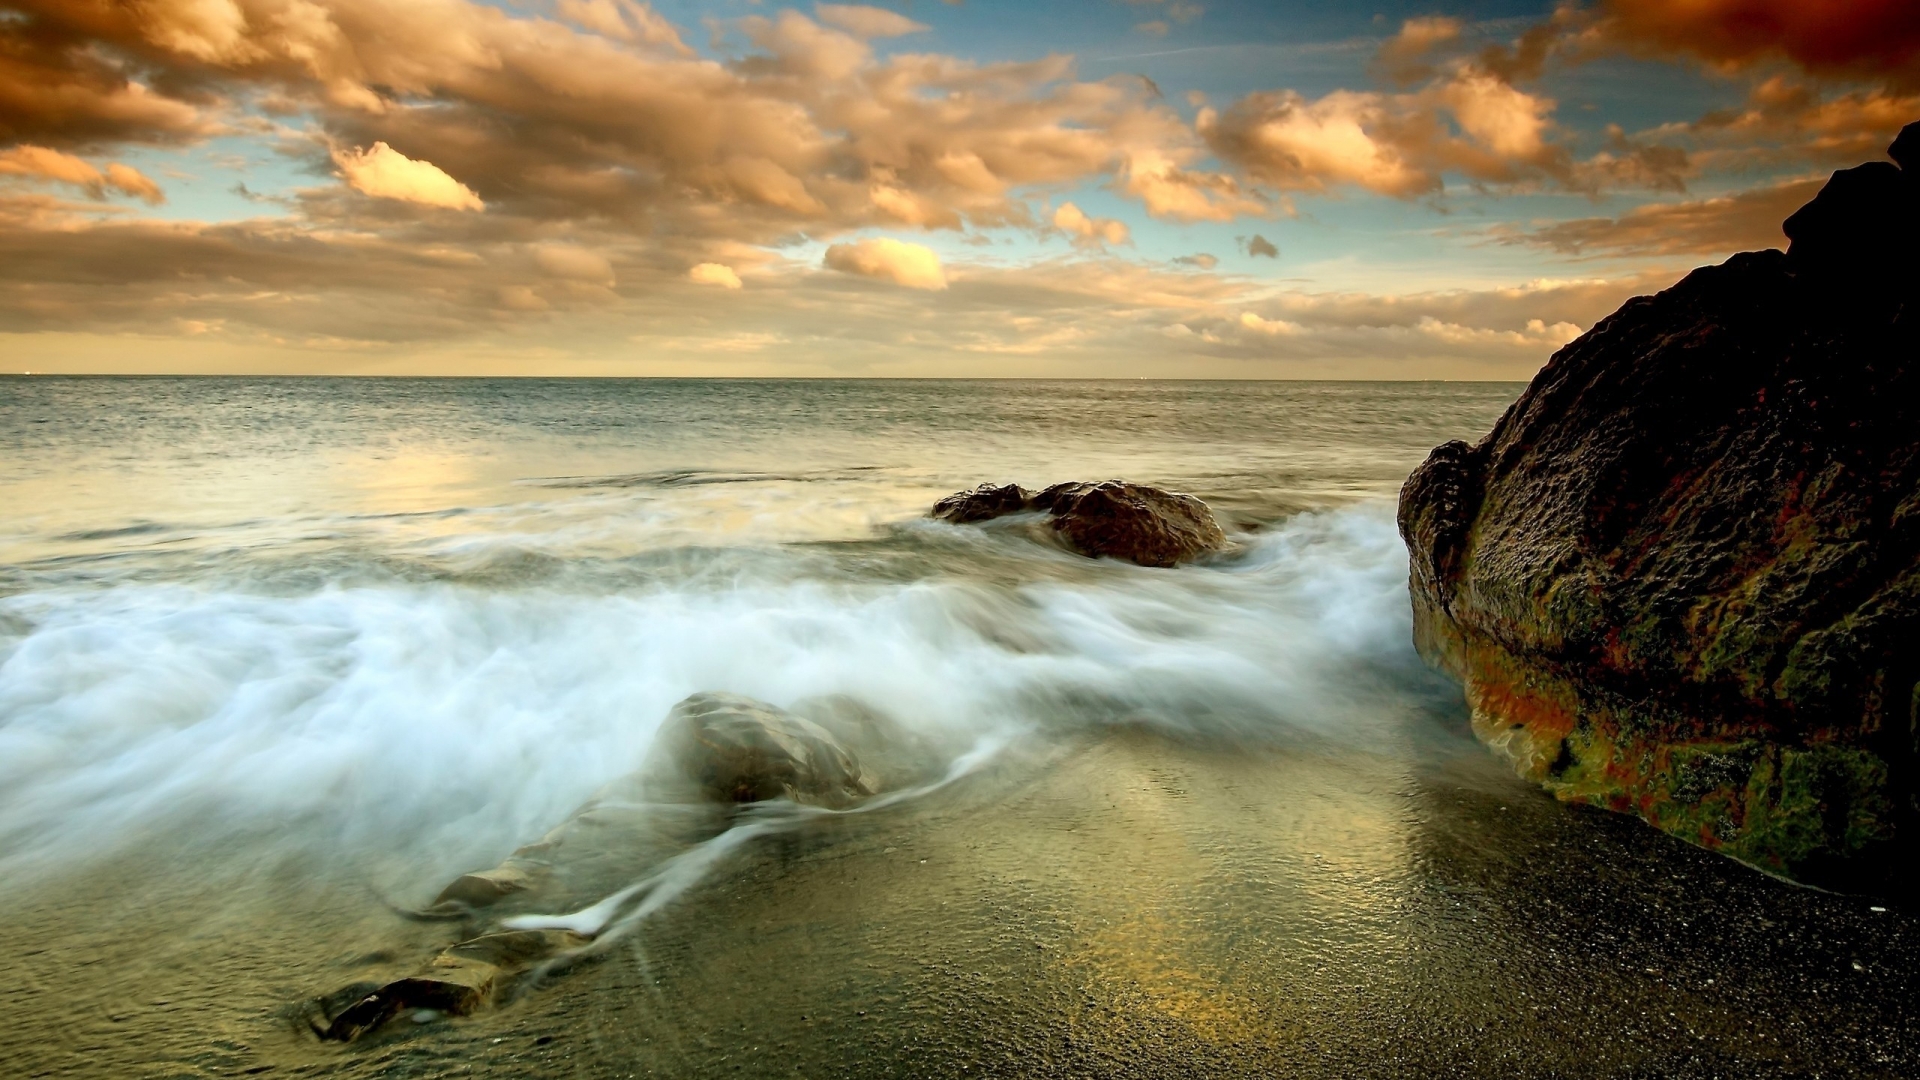 Beautiful Sea Waves for 1920 x 1080 HDTV 1080p resolution